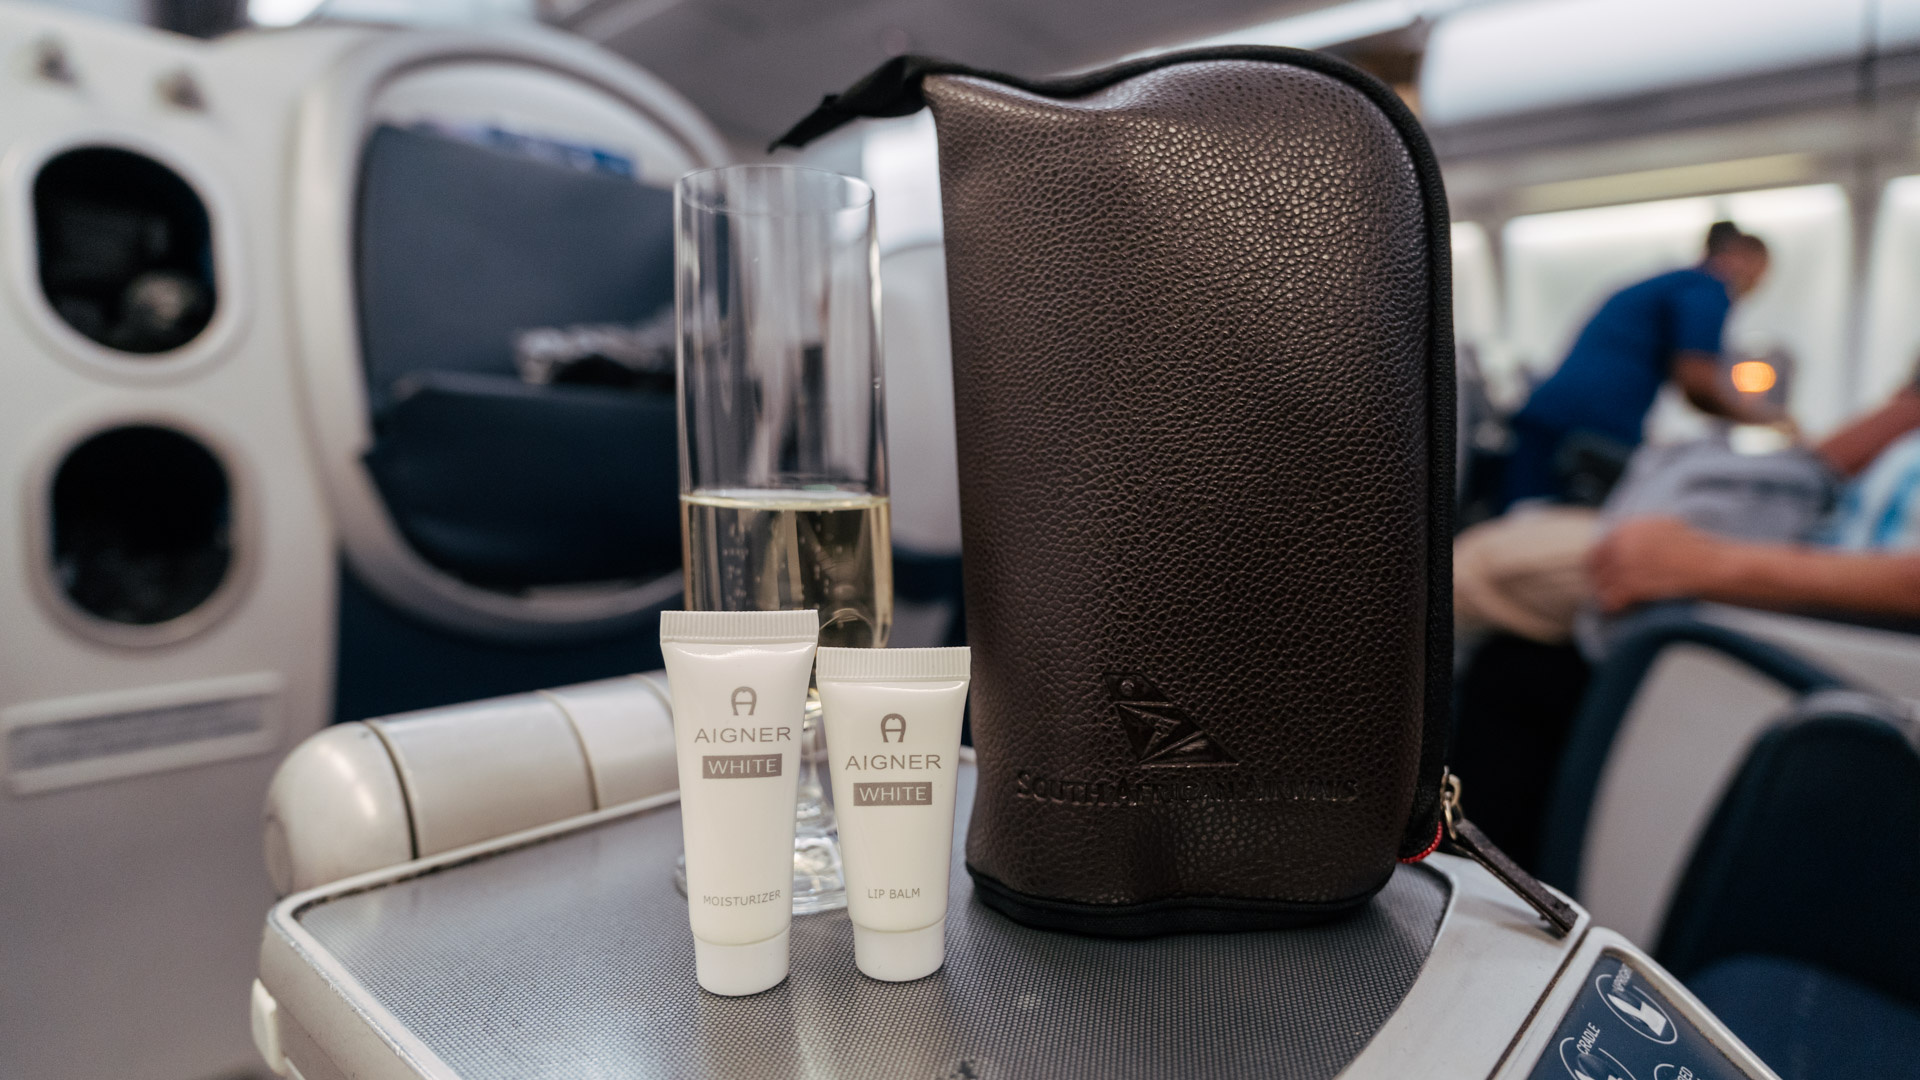 South African Airways A340 amenity kit